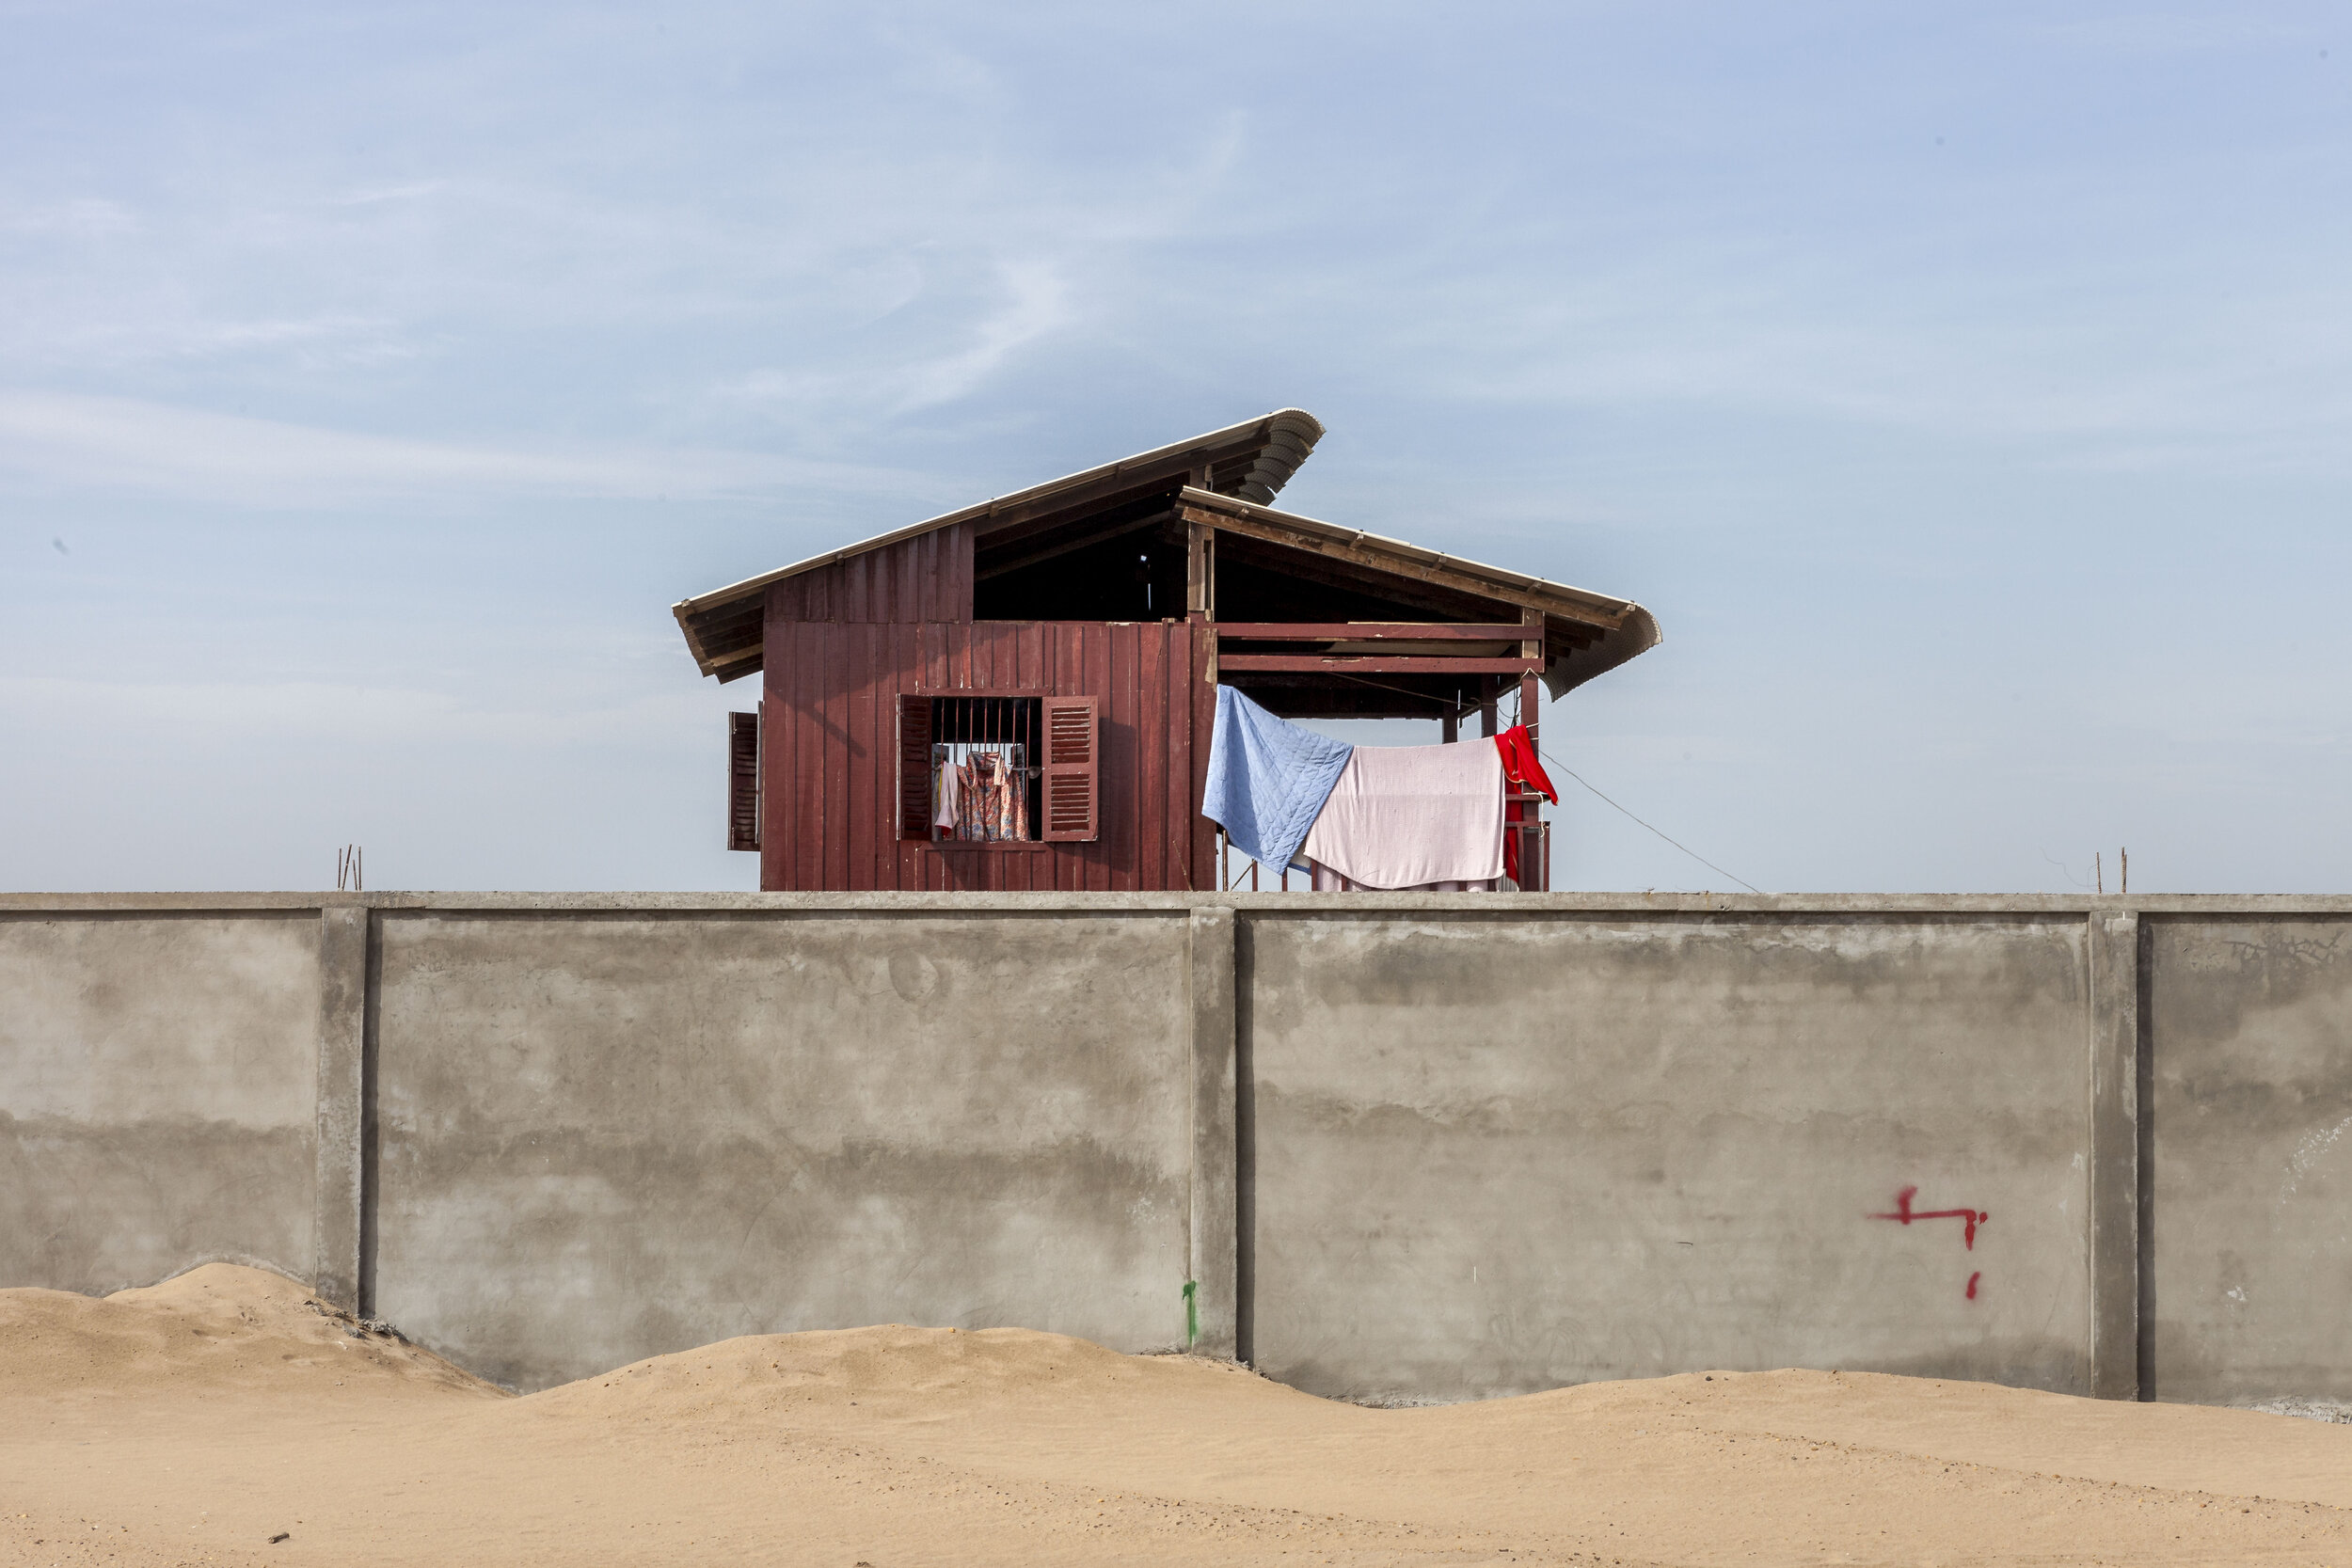  A concrete wall at the edge of the current sand landfill, with a Prek Takong home on the other side.    